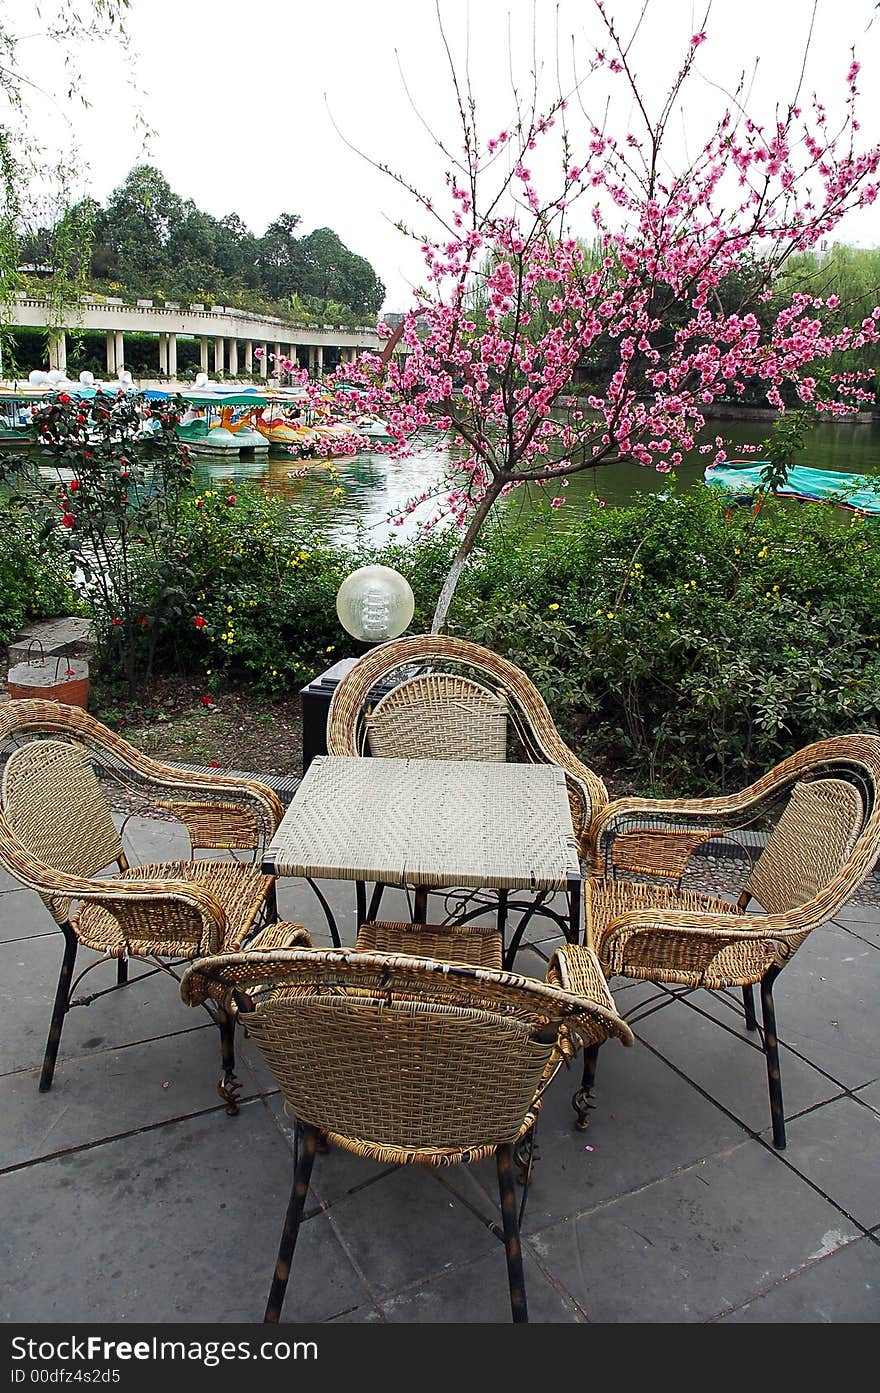 Chairs and tables in a garden in China. Chairs and tables in a garden in China